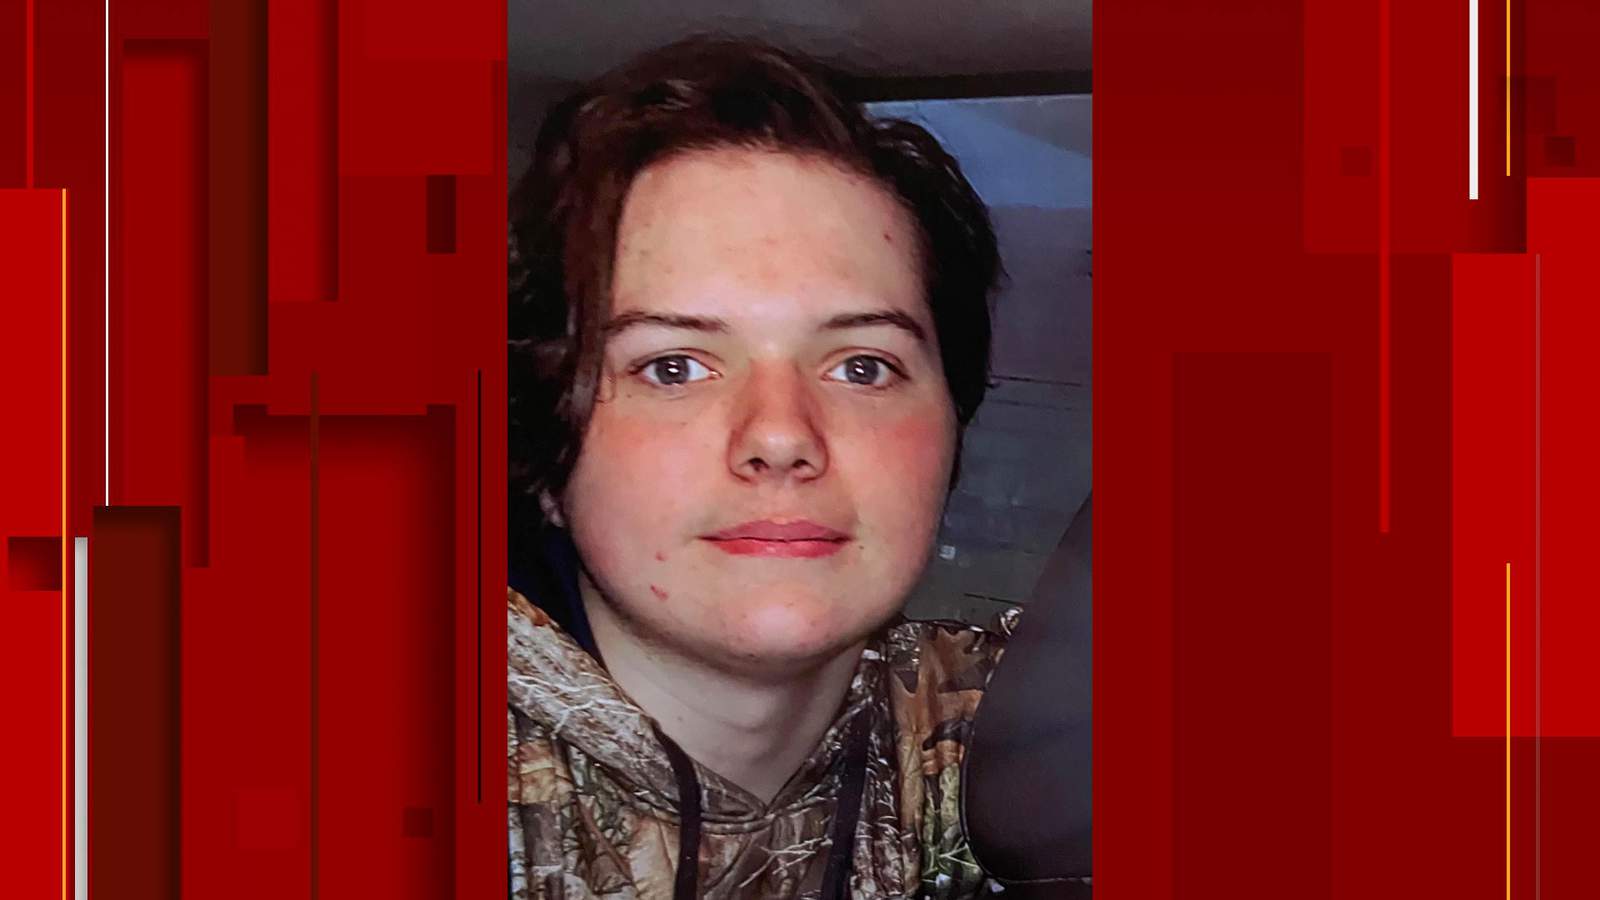 Authorities found missing Bedford County 16-year-old